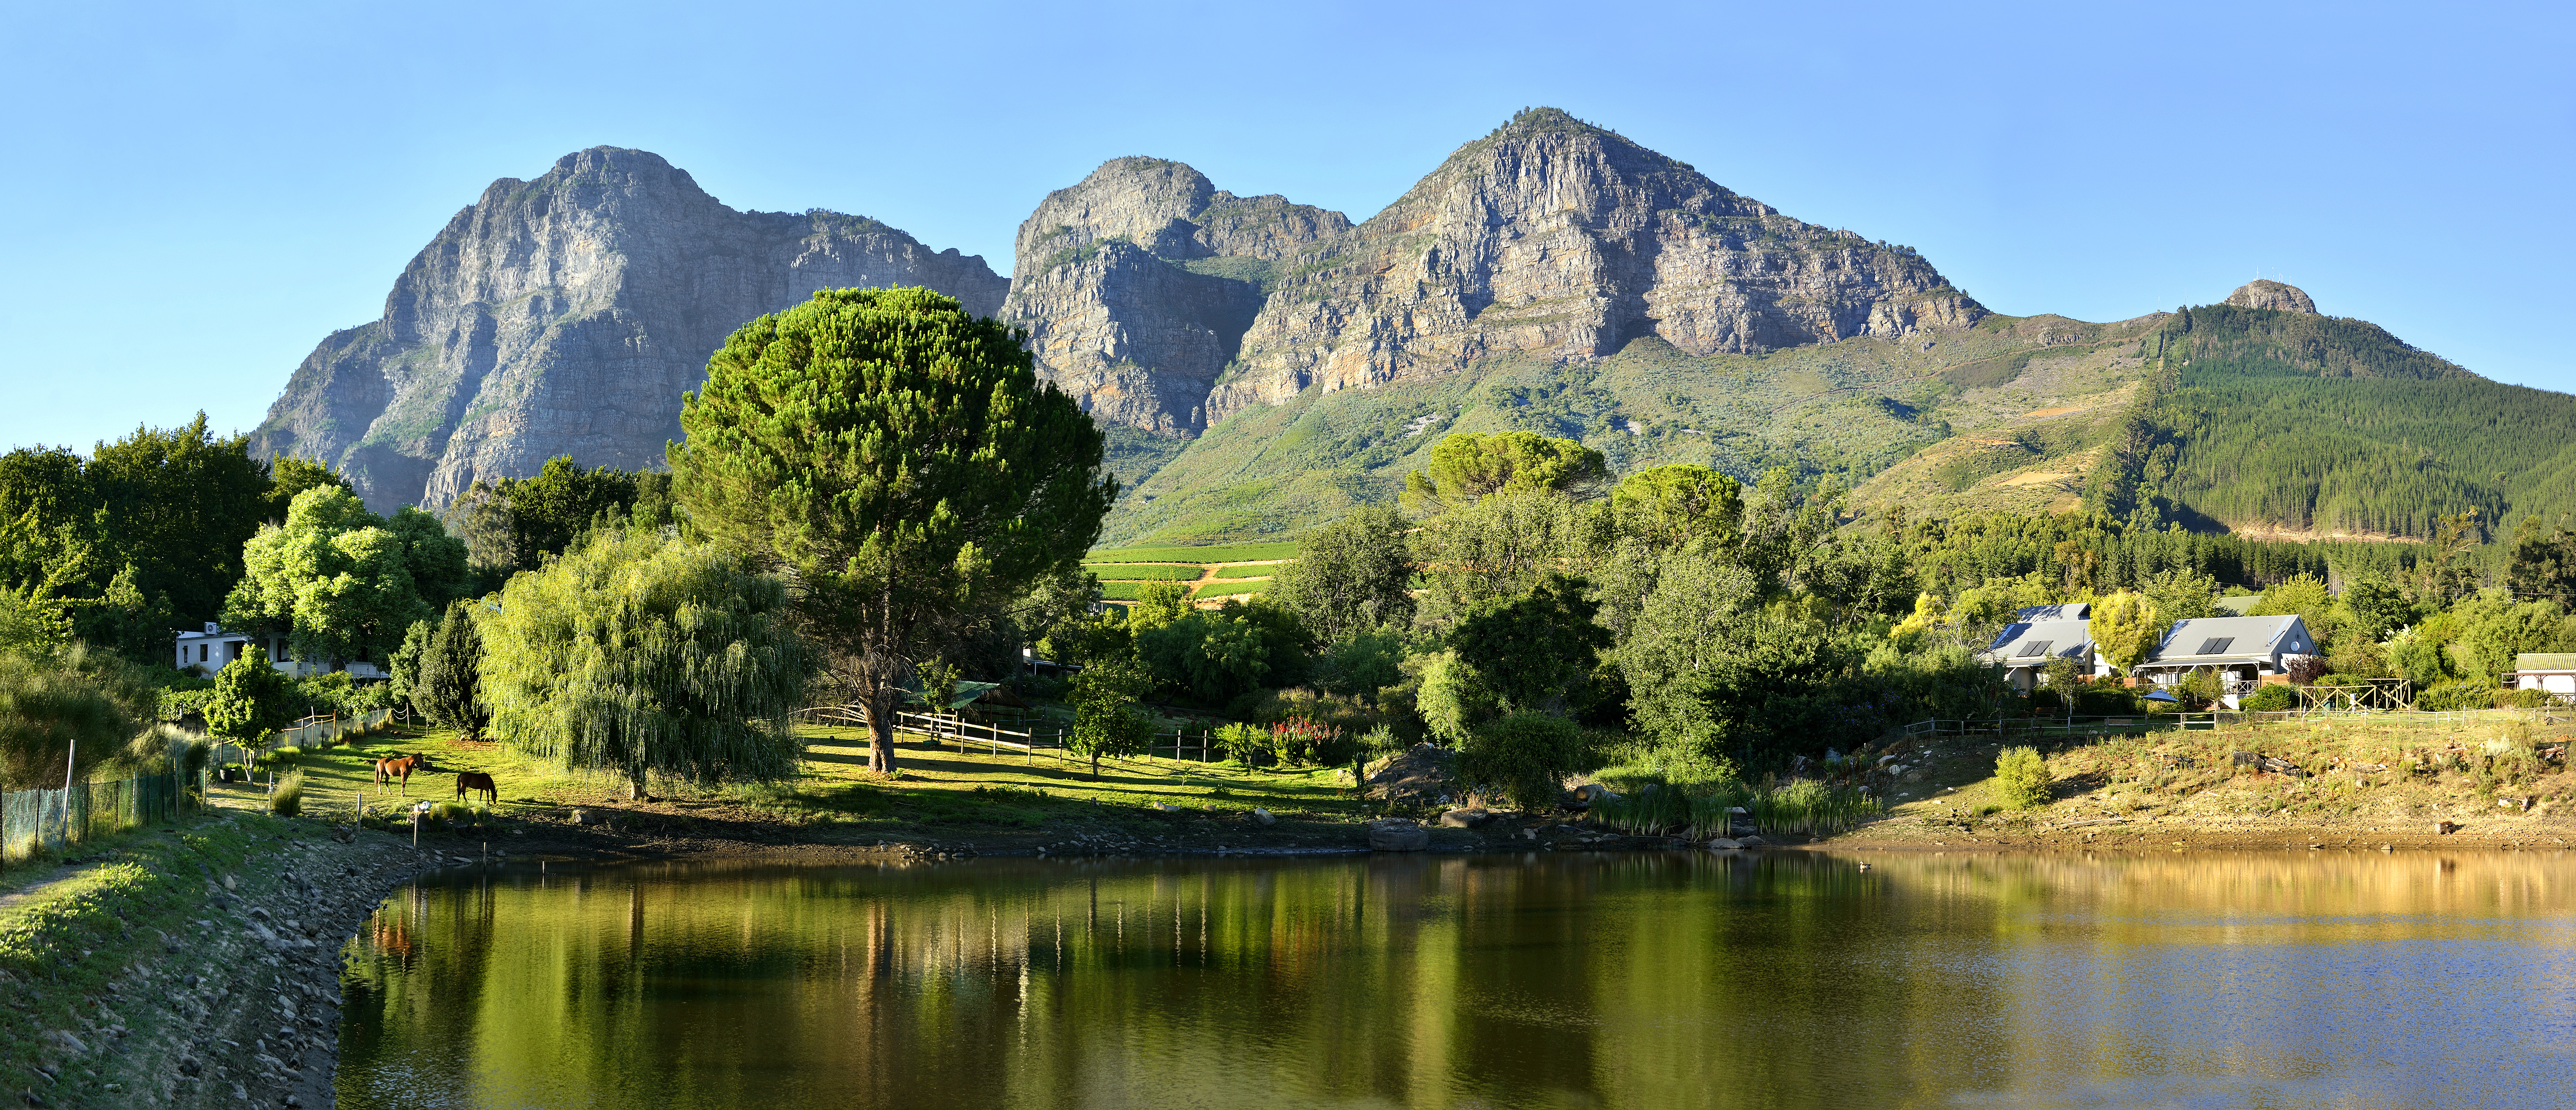 Mountain View, Angala Boutique Hotel, Winelands, South Africa